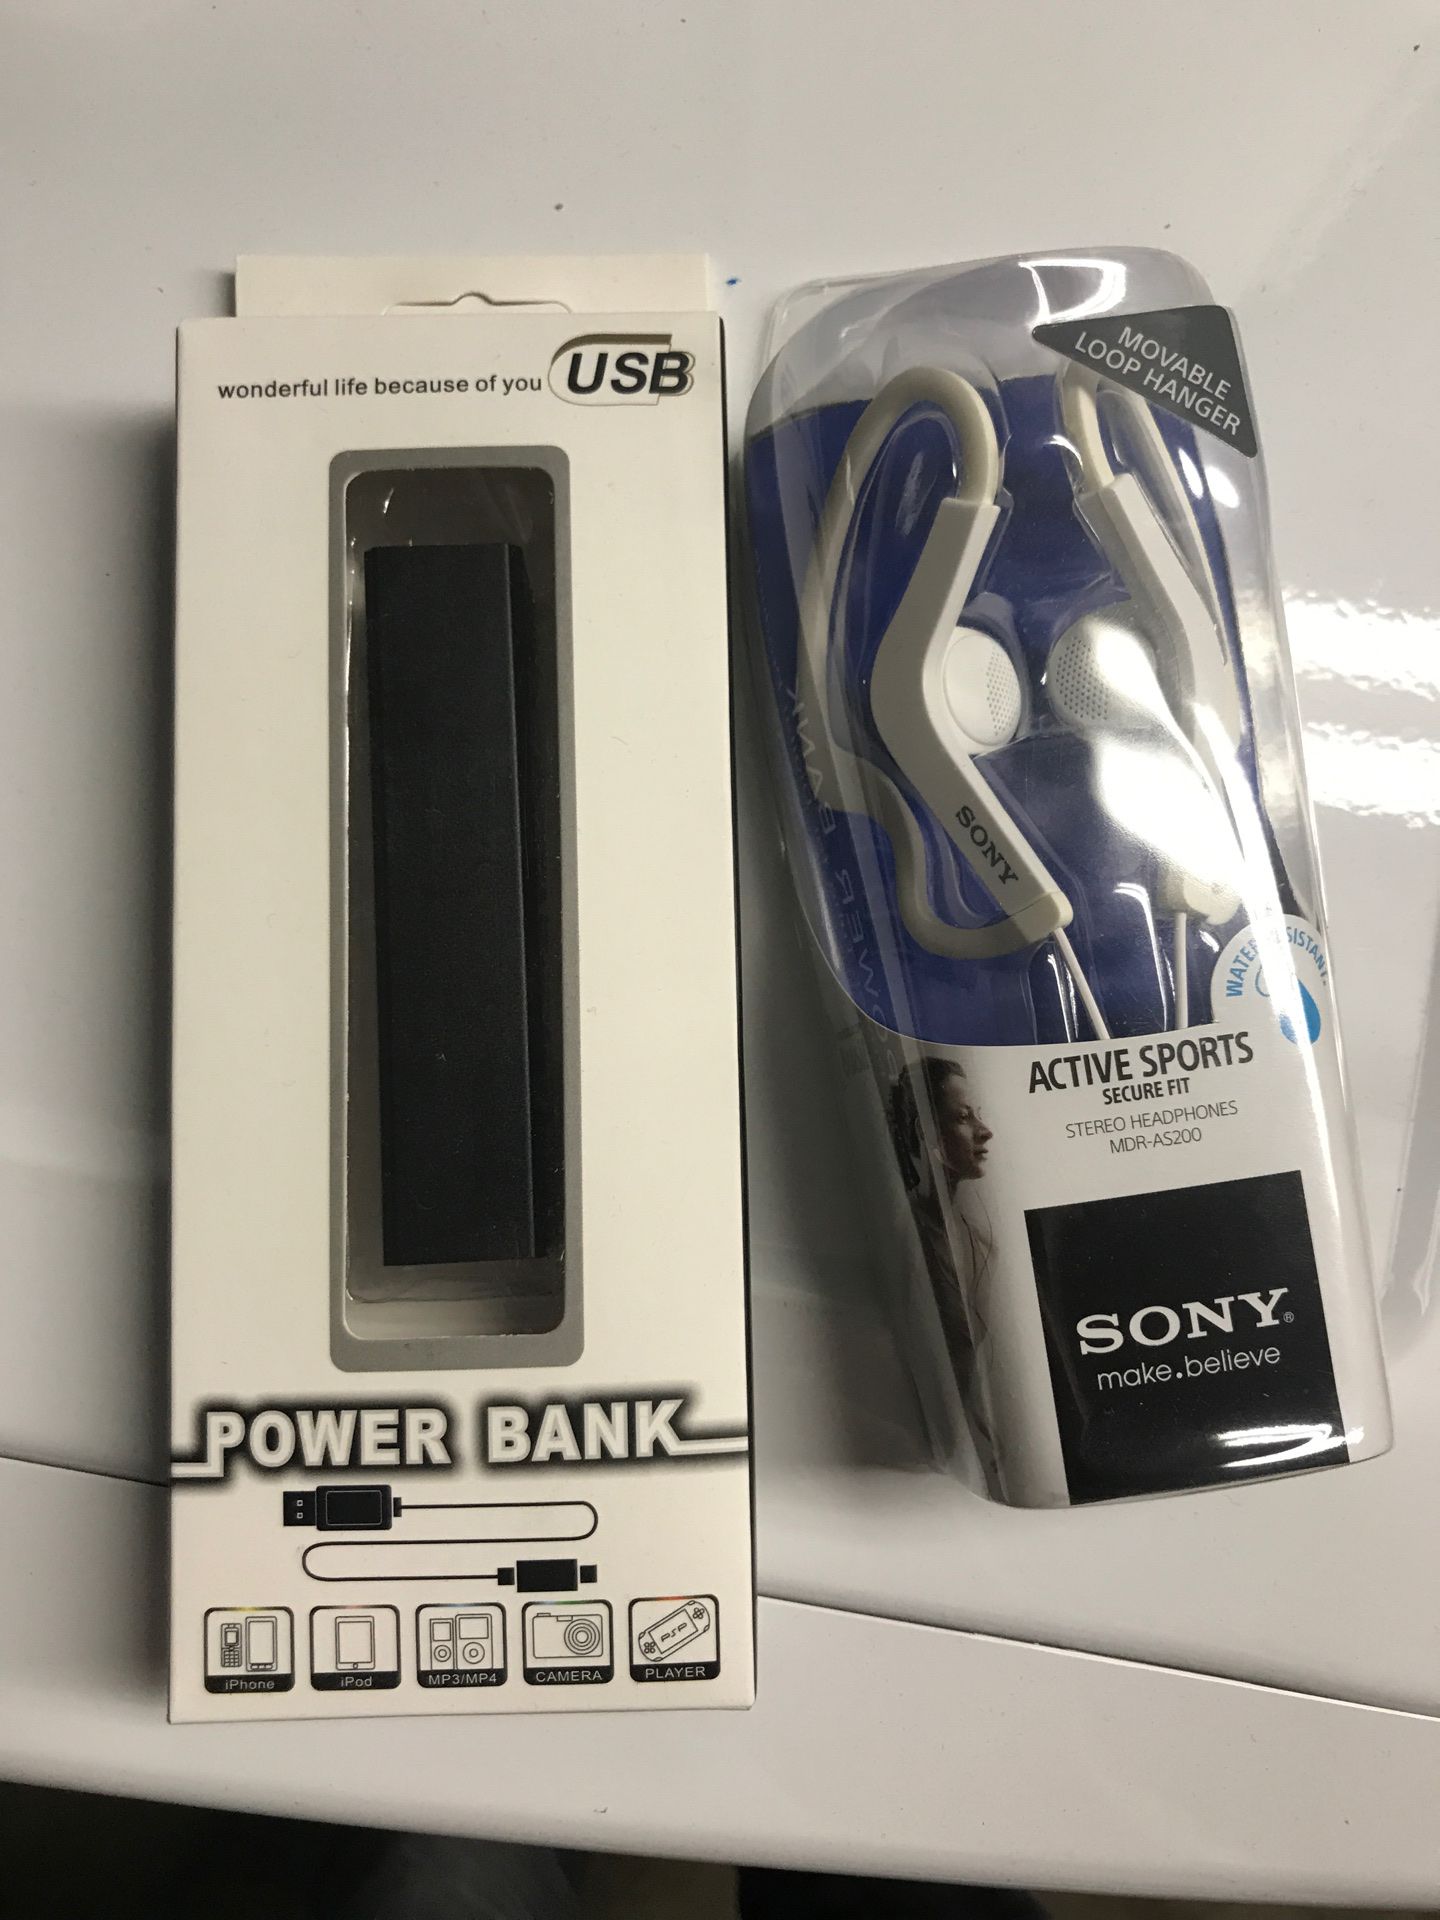 USB Power bank and Sony MDRAS200 Active Sports Headphones (White)